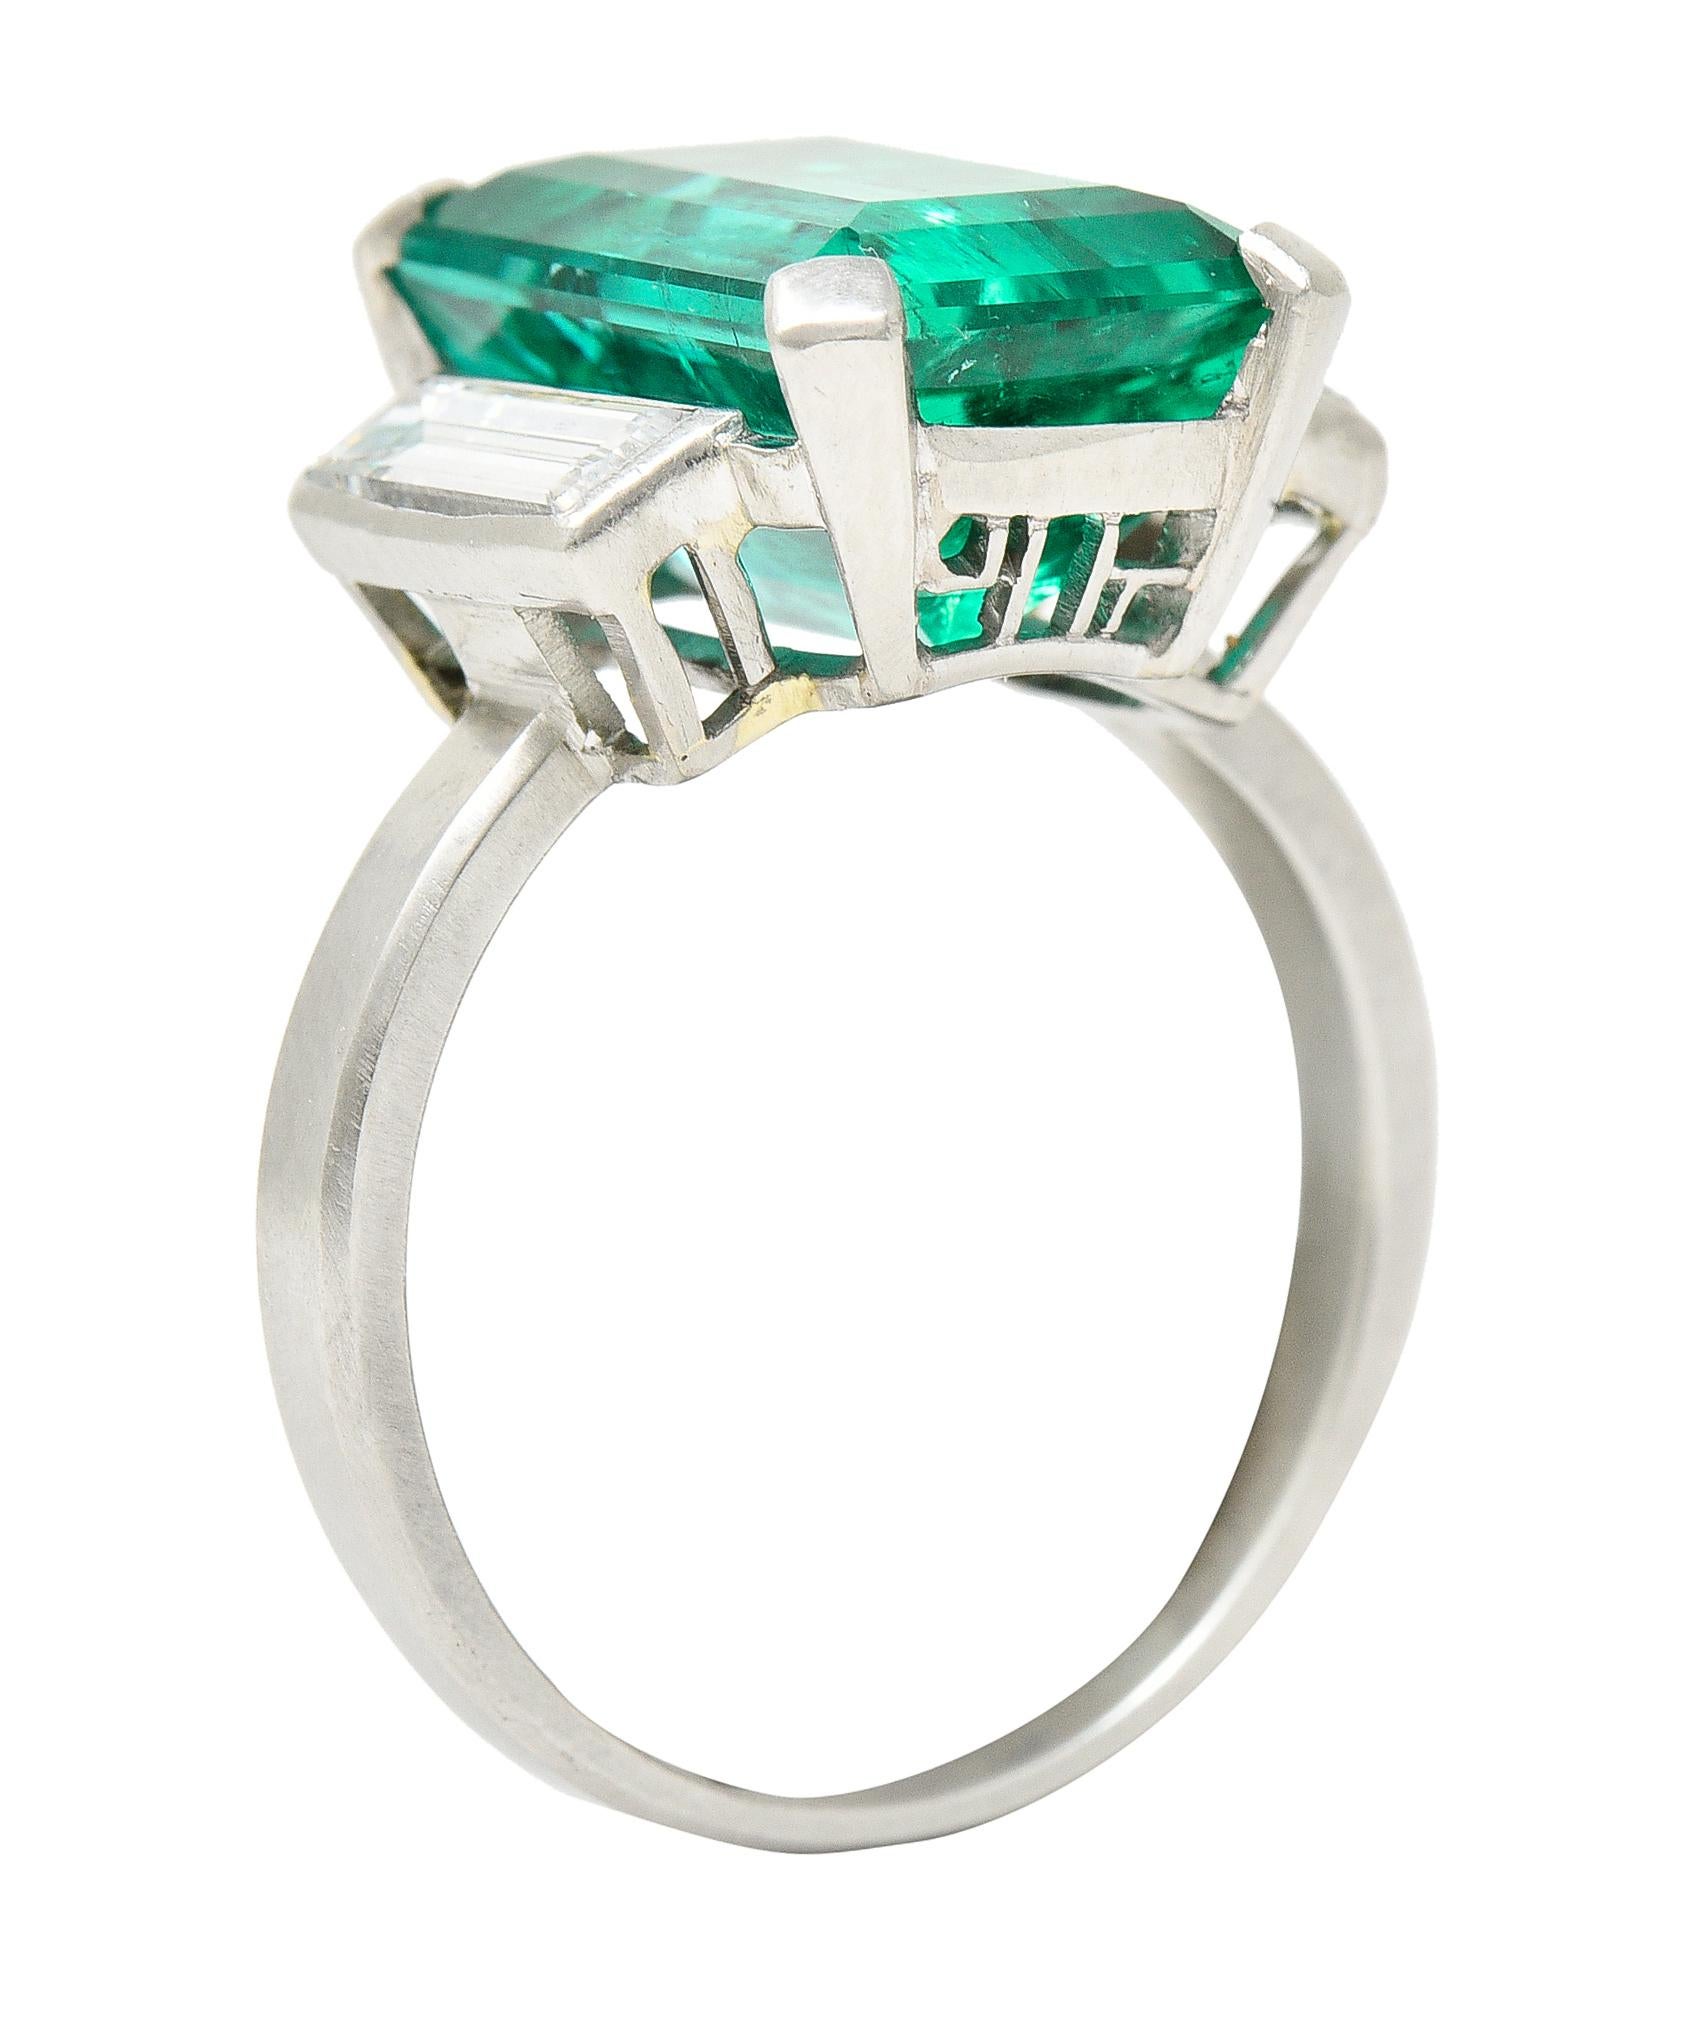 Centering an emerald cut emerald weighing approximately 5.78 carats total - Columbian in origin. Transparent medium blueish green in color with natural inclusions - moderate clarity enhancement F2. Prong set in a stylized pierced modernist cubist